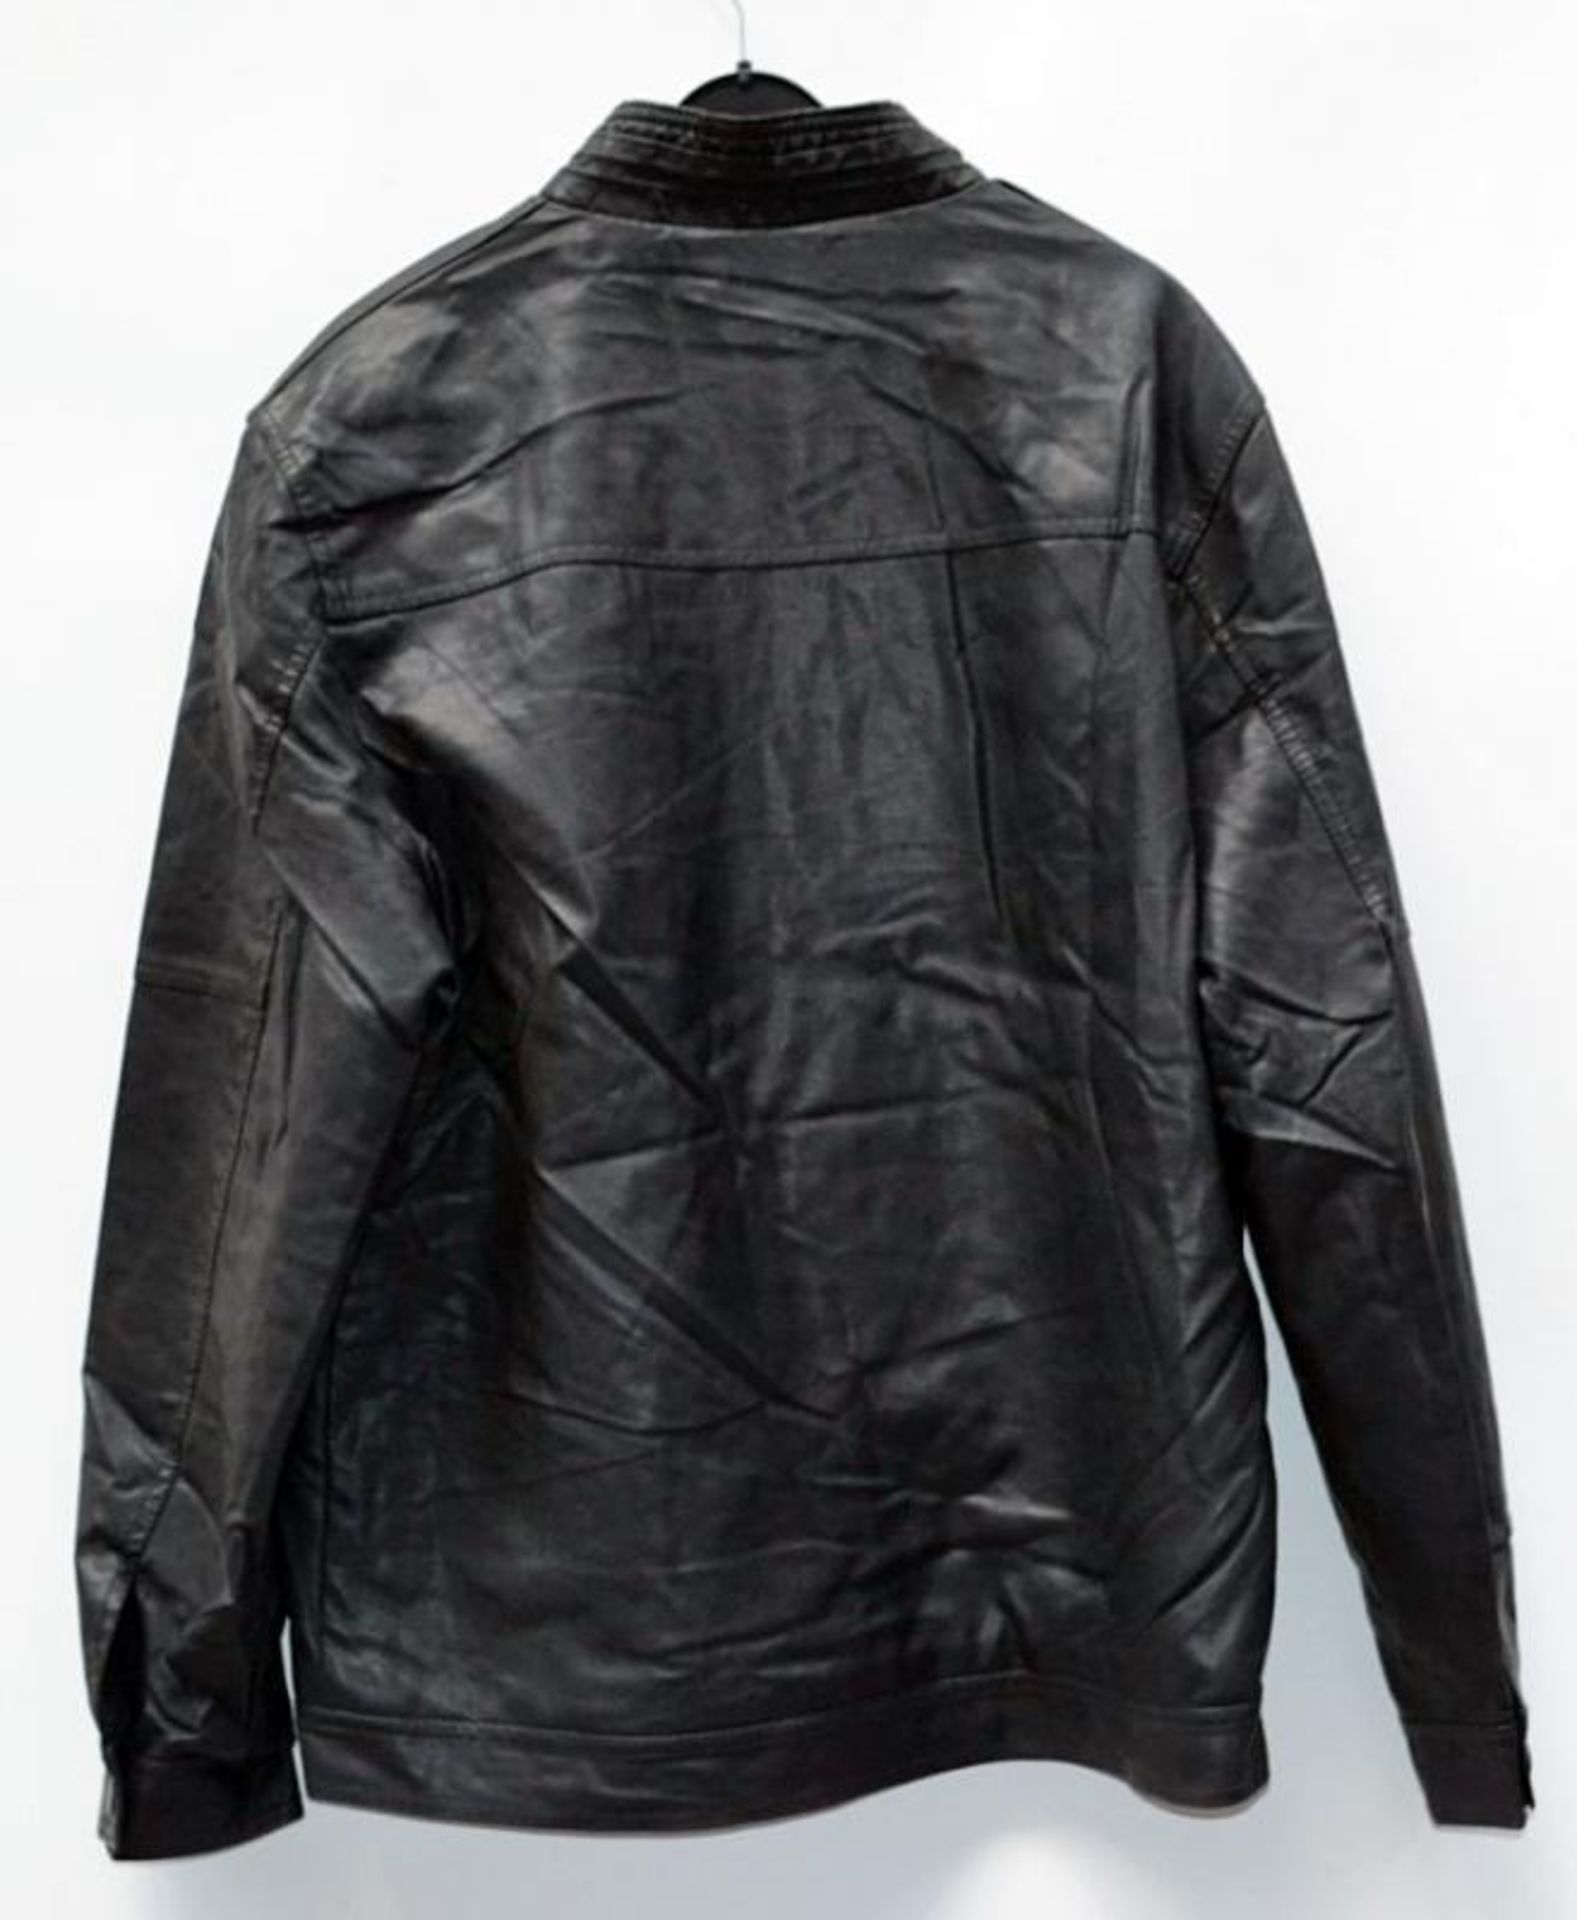 1 x Mens Biker-Style Faux Leather Jacket - New Without Tags - Recent Store Closure - Size: UK Medium - Image 10 of 11